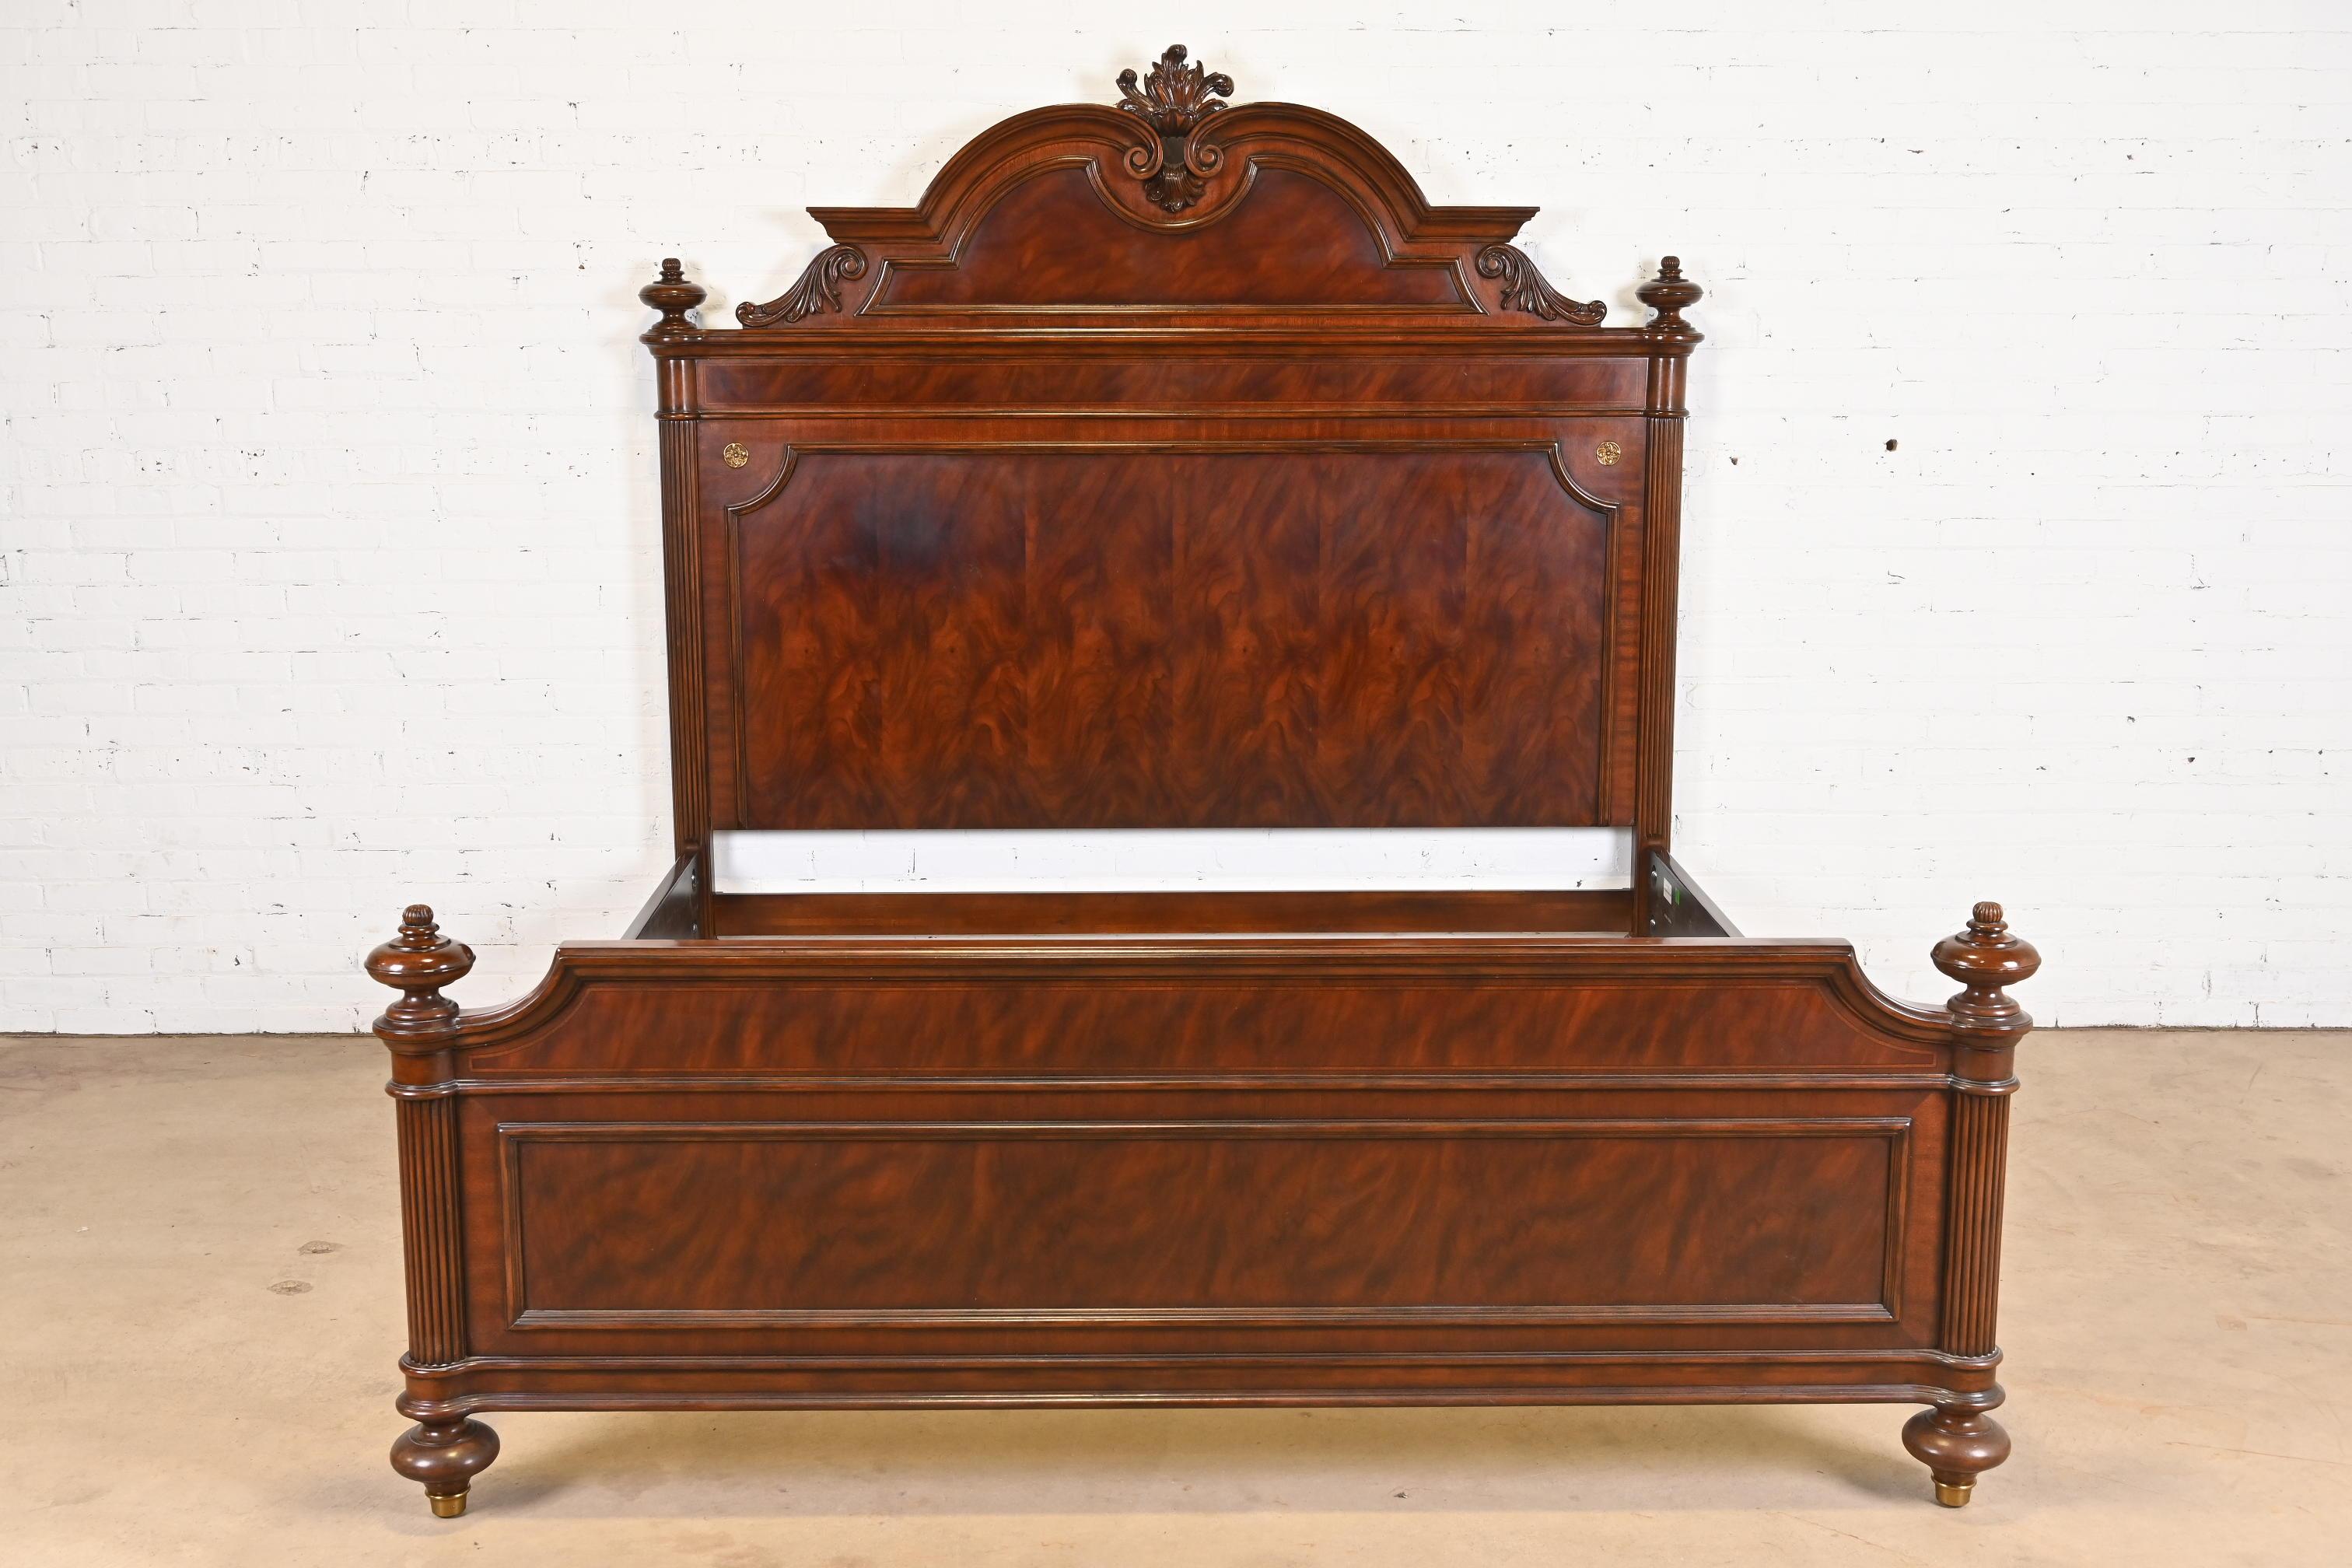 20th Century Ralph Lauren Style French Empire Flame Mahogany King Size Bed